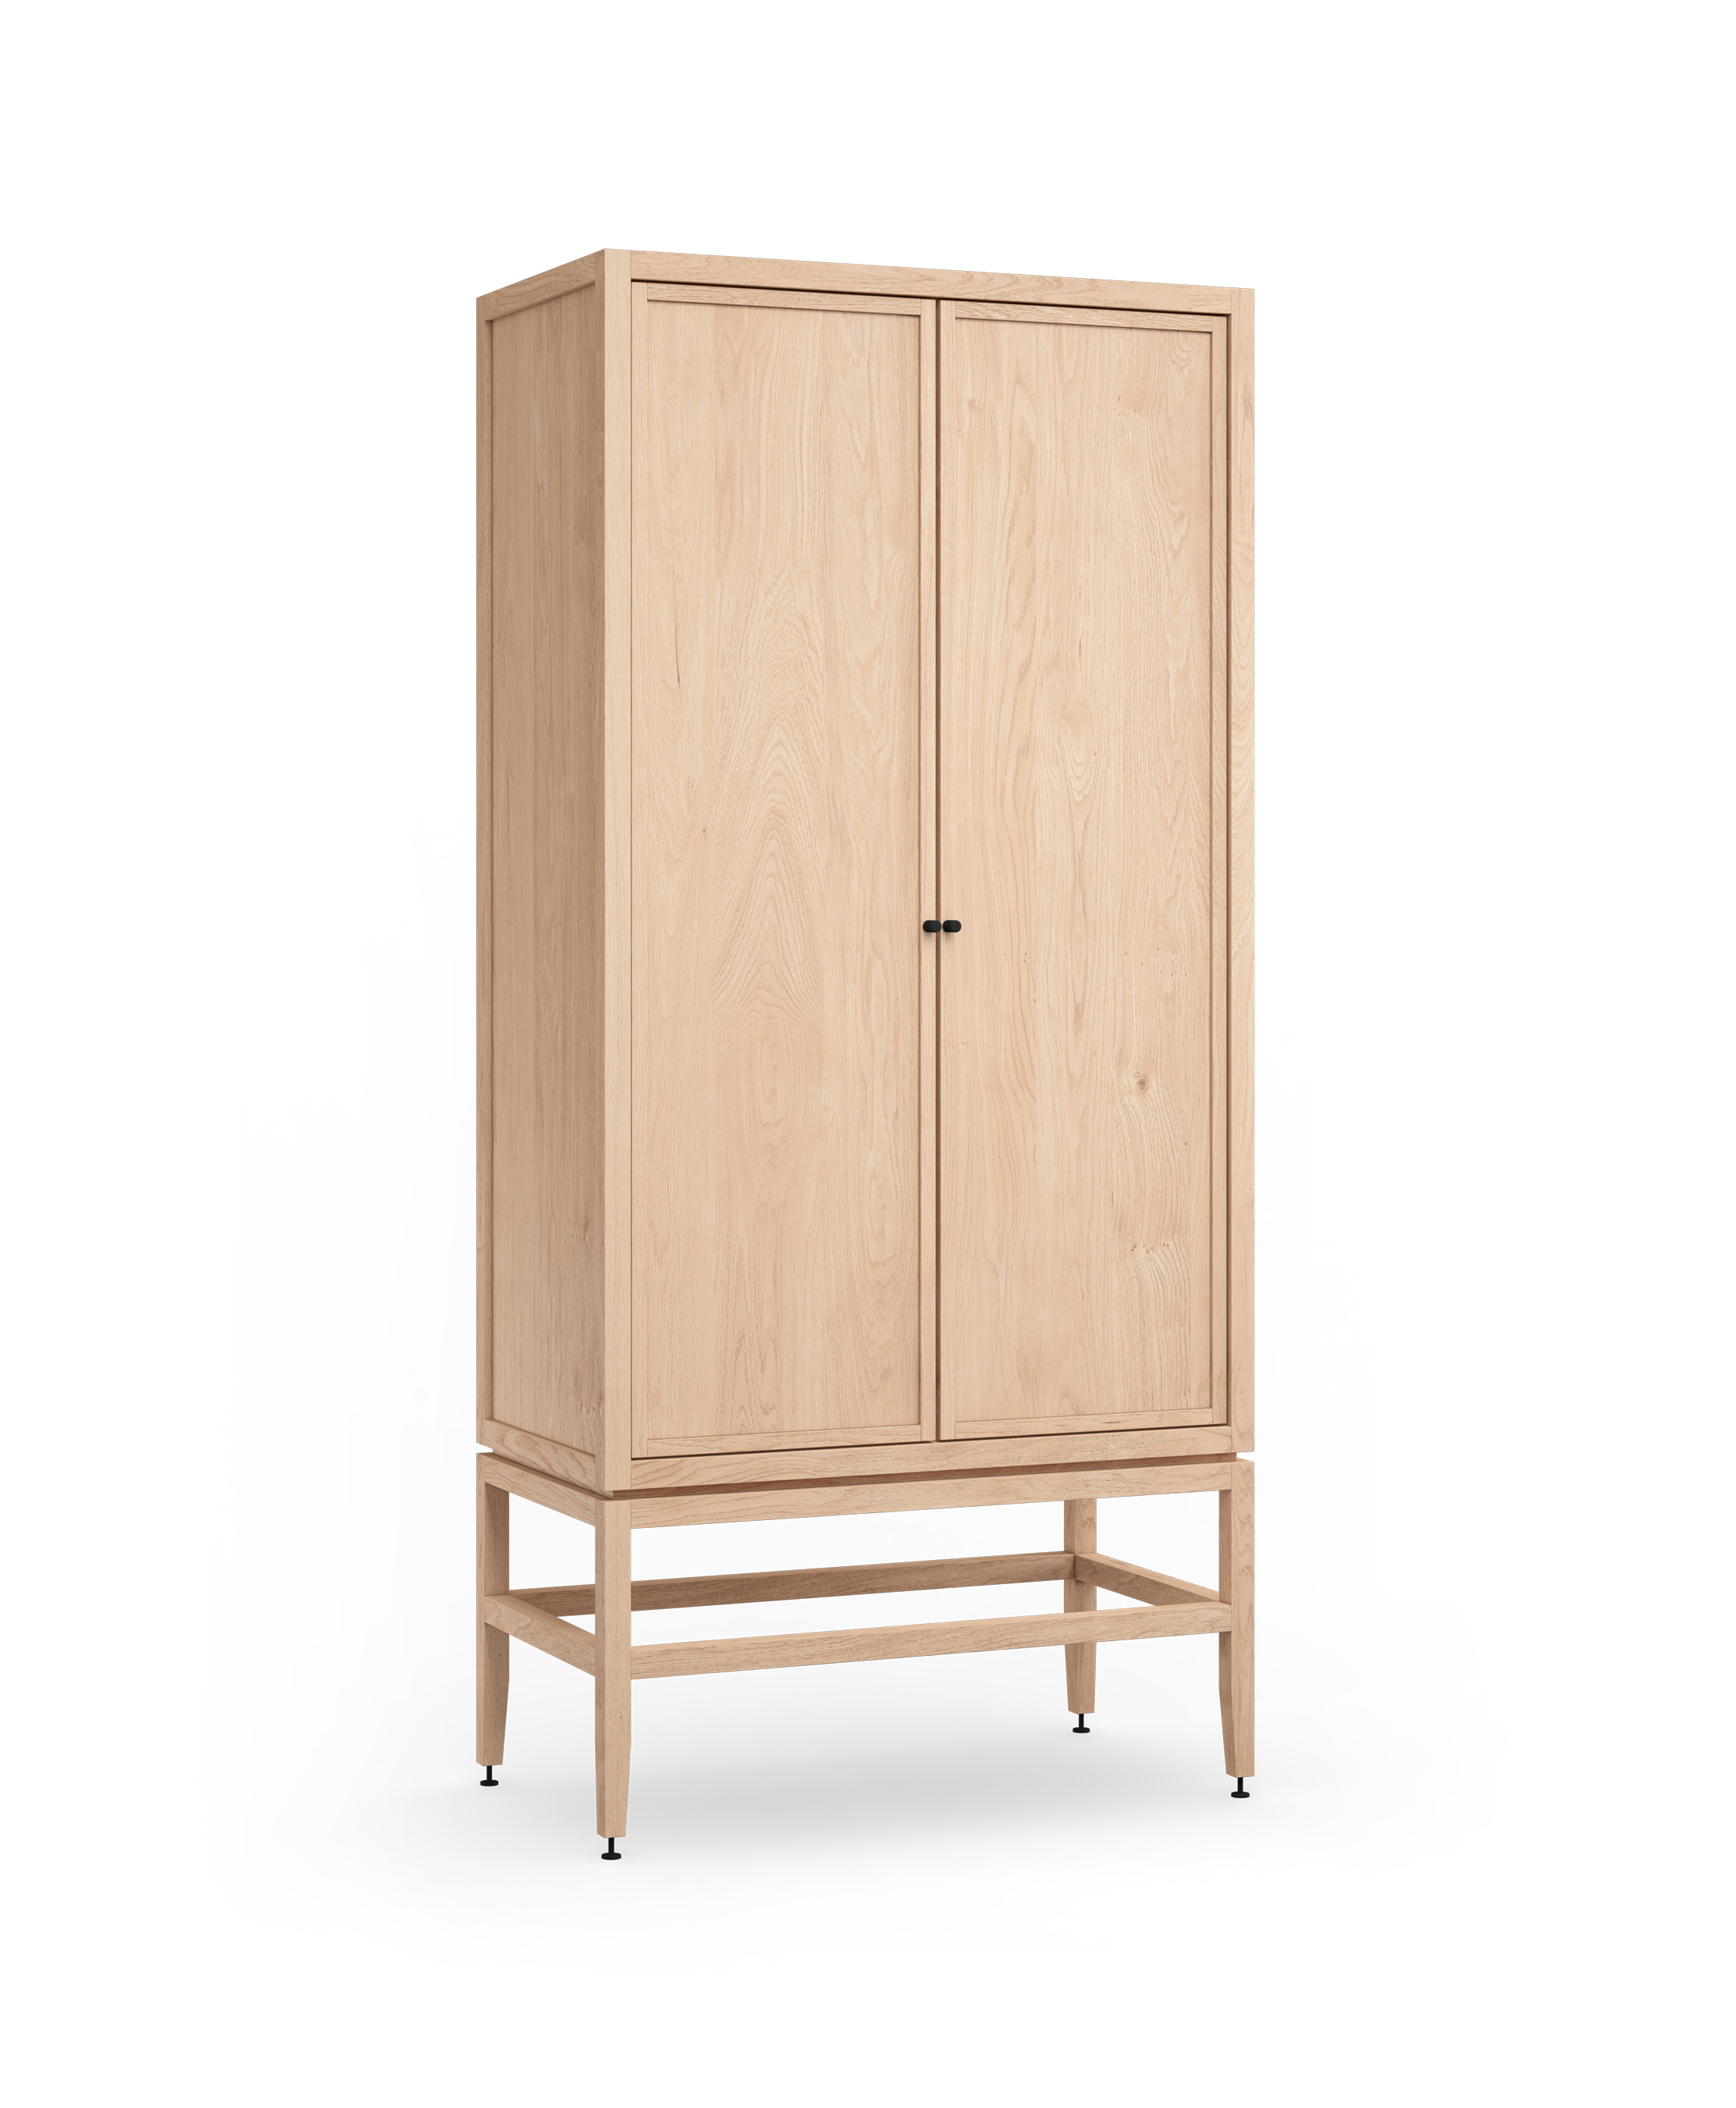 Coquo freestanding armoire in natural oak with wood doors. Can be used as a pantry, buffet, wardrobe, pharmacy.